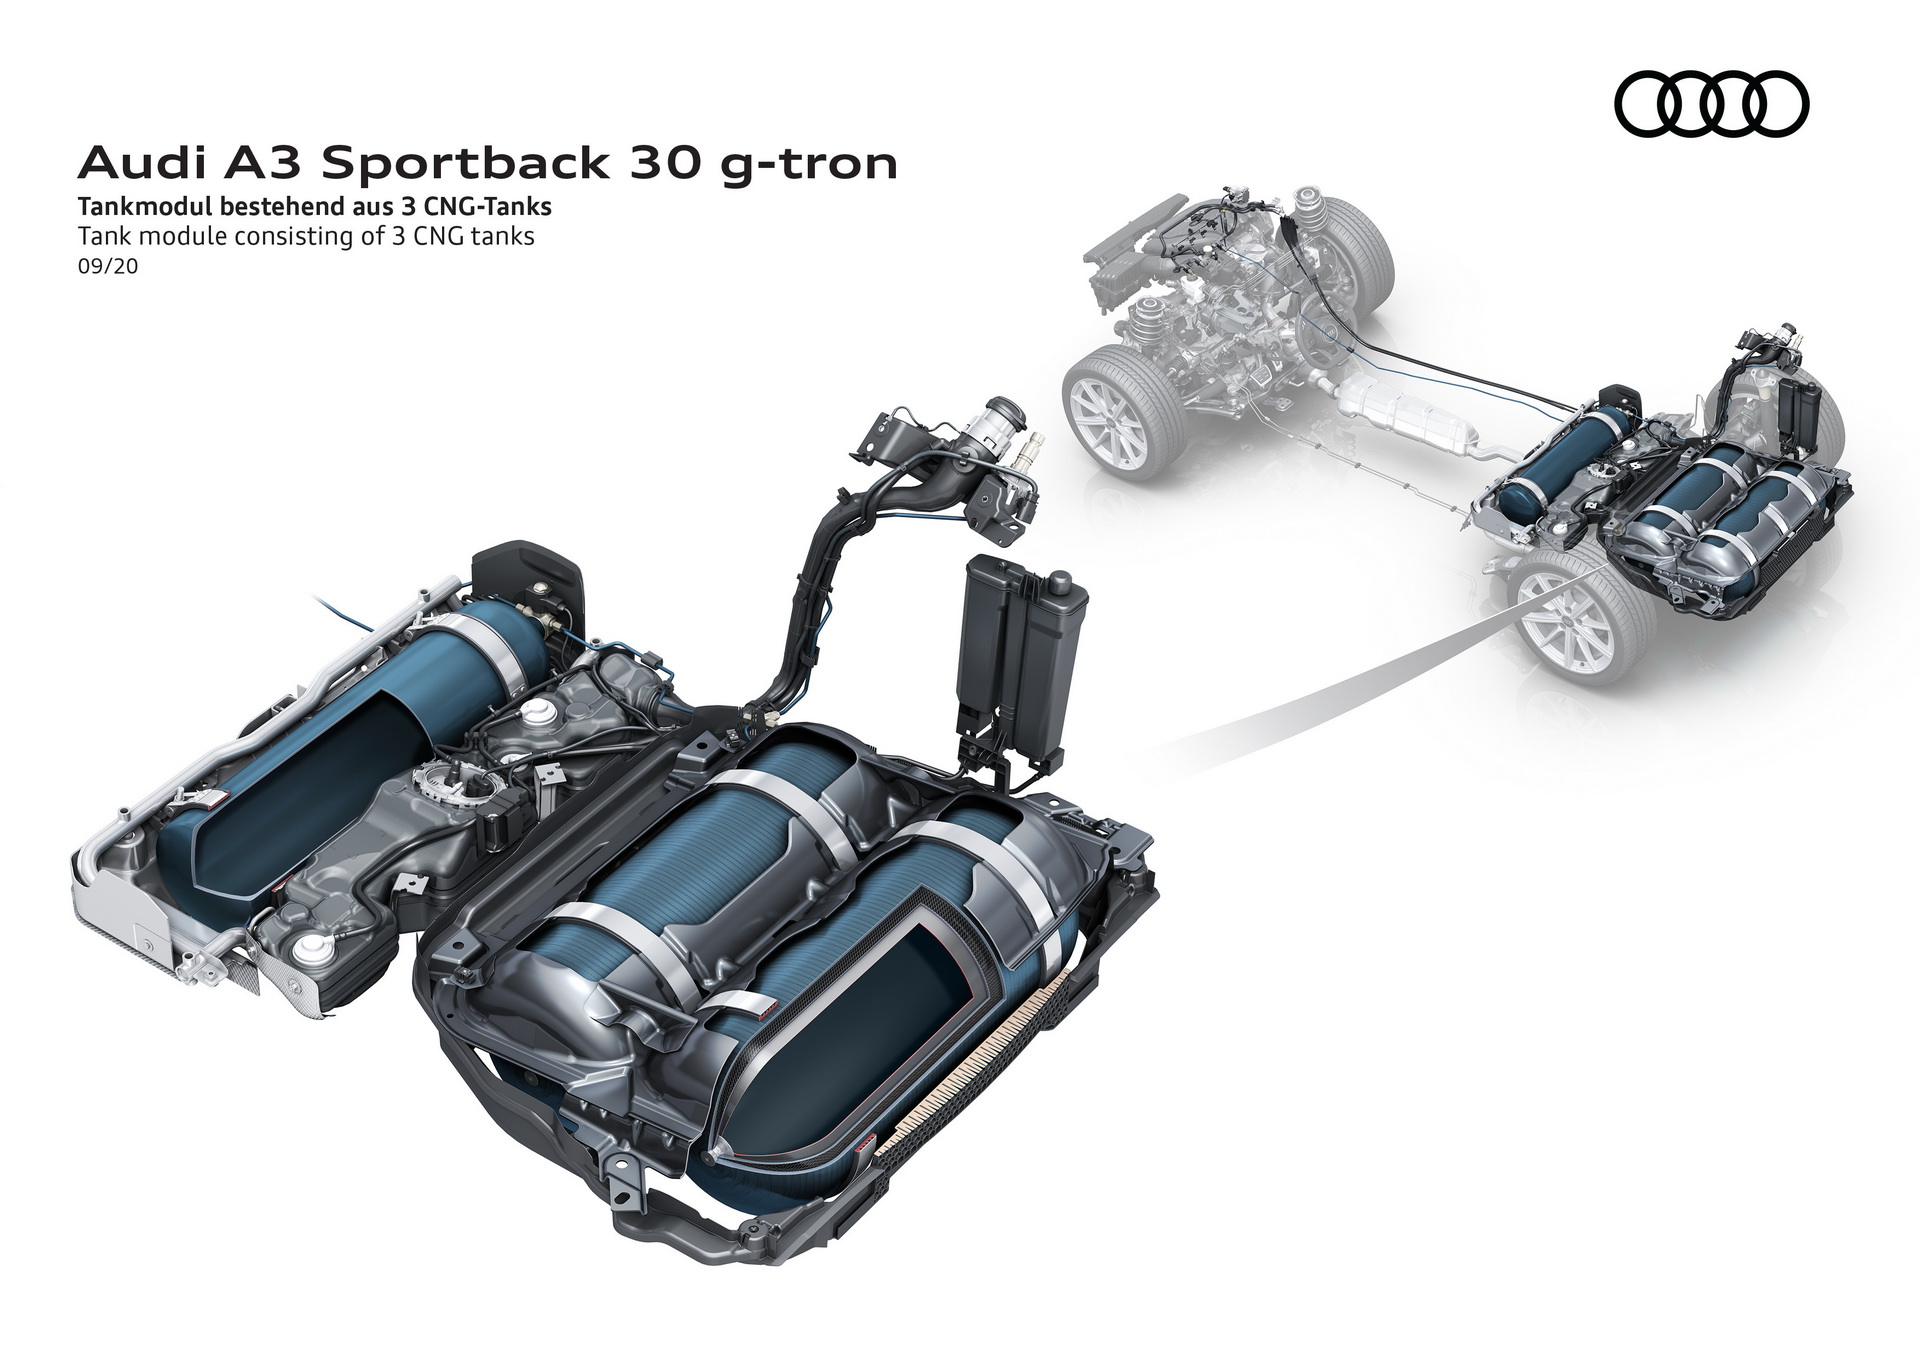 21 Audi A3 Sportback 30 G Tron Is A 129 Hp Cng Powered Premium Hatchback Carscoops